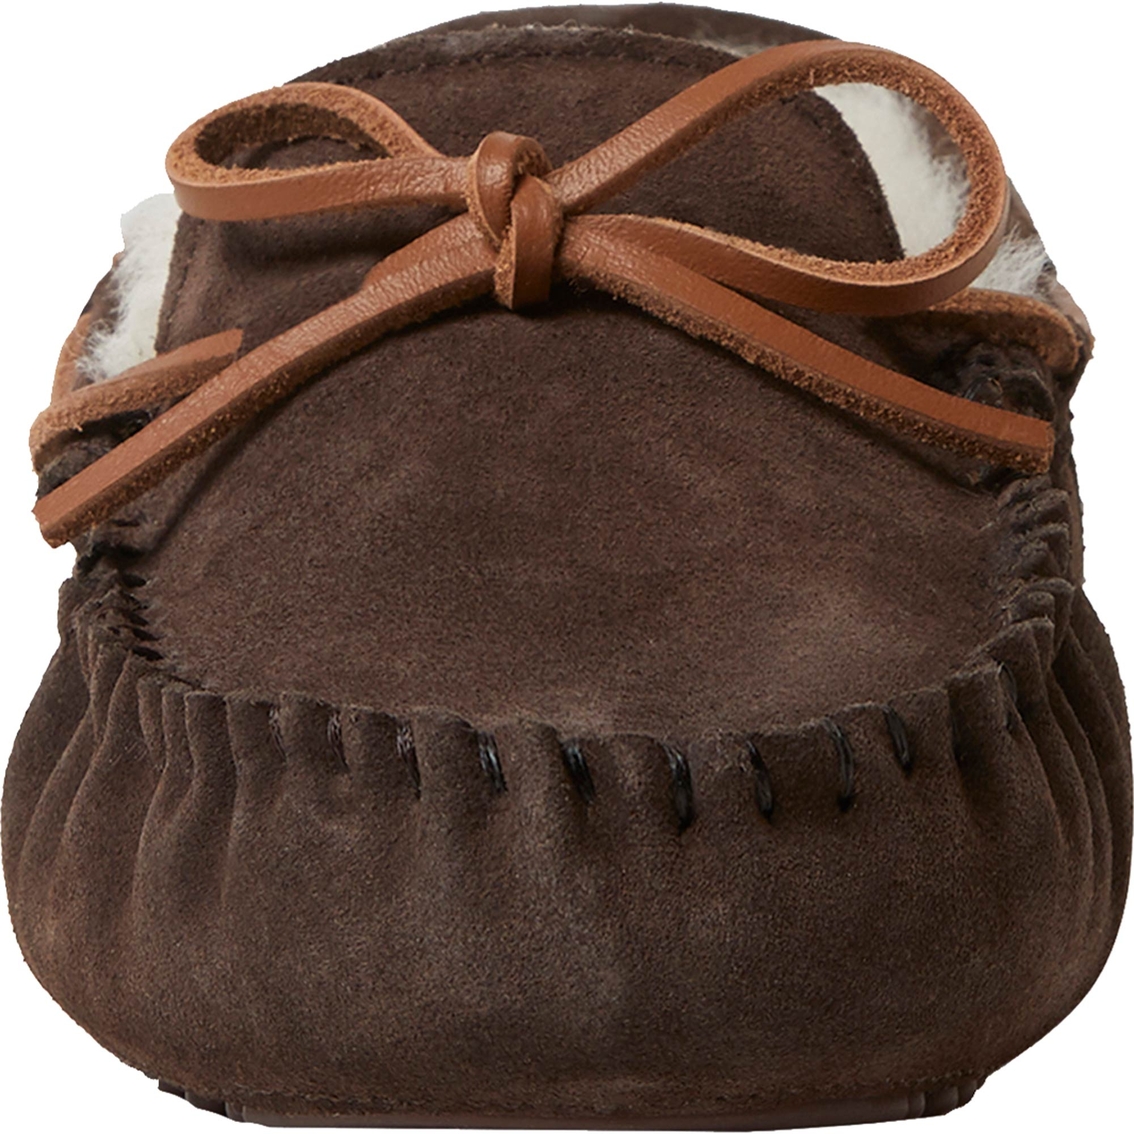 Fireside by Dearfoams Men's Victor Shearling Moccasin Slippers with Tie - Image 4 of 8